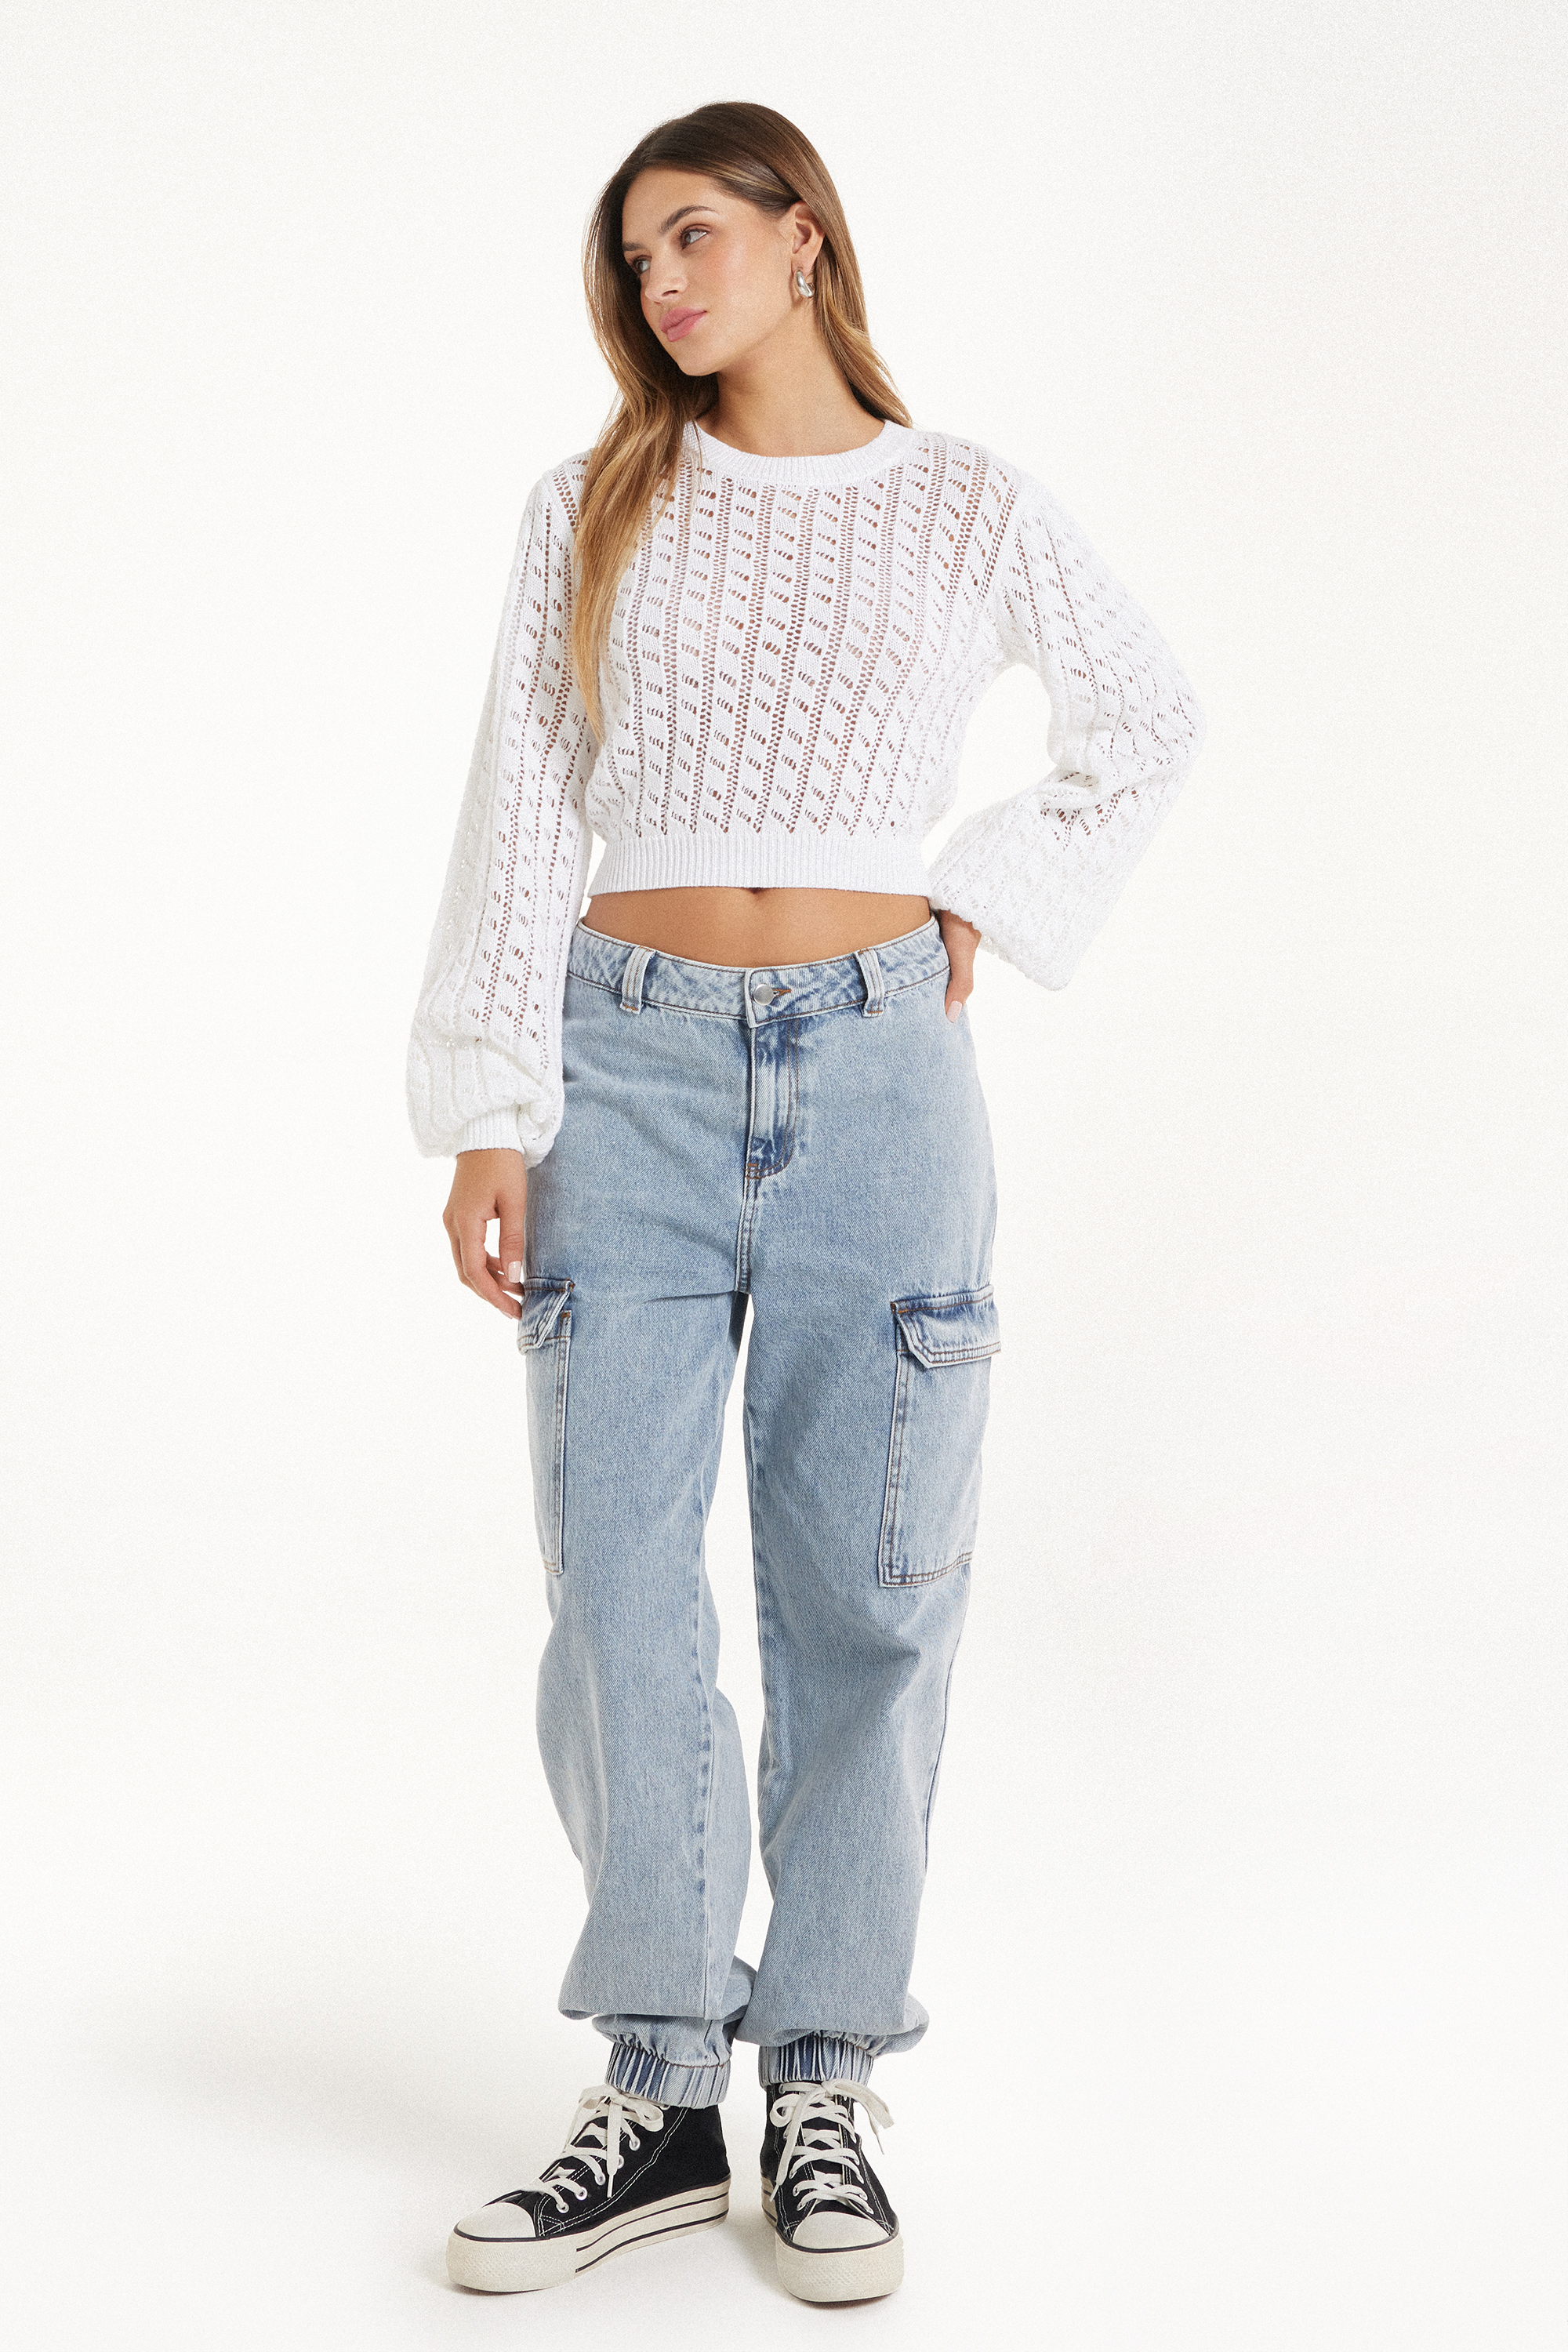 Long-Sleeved Cropped Openwork Sweater